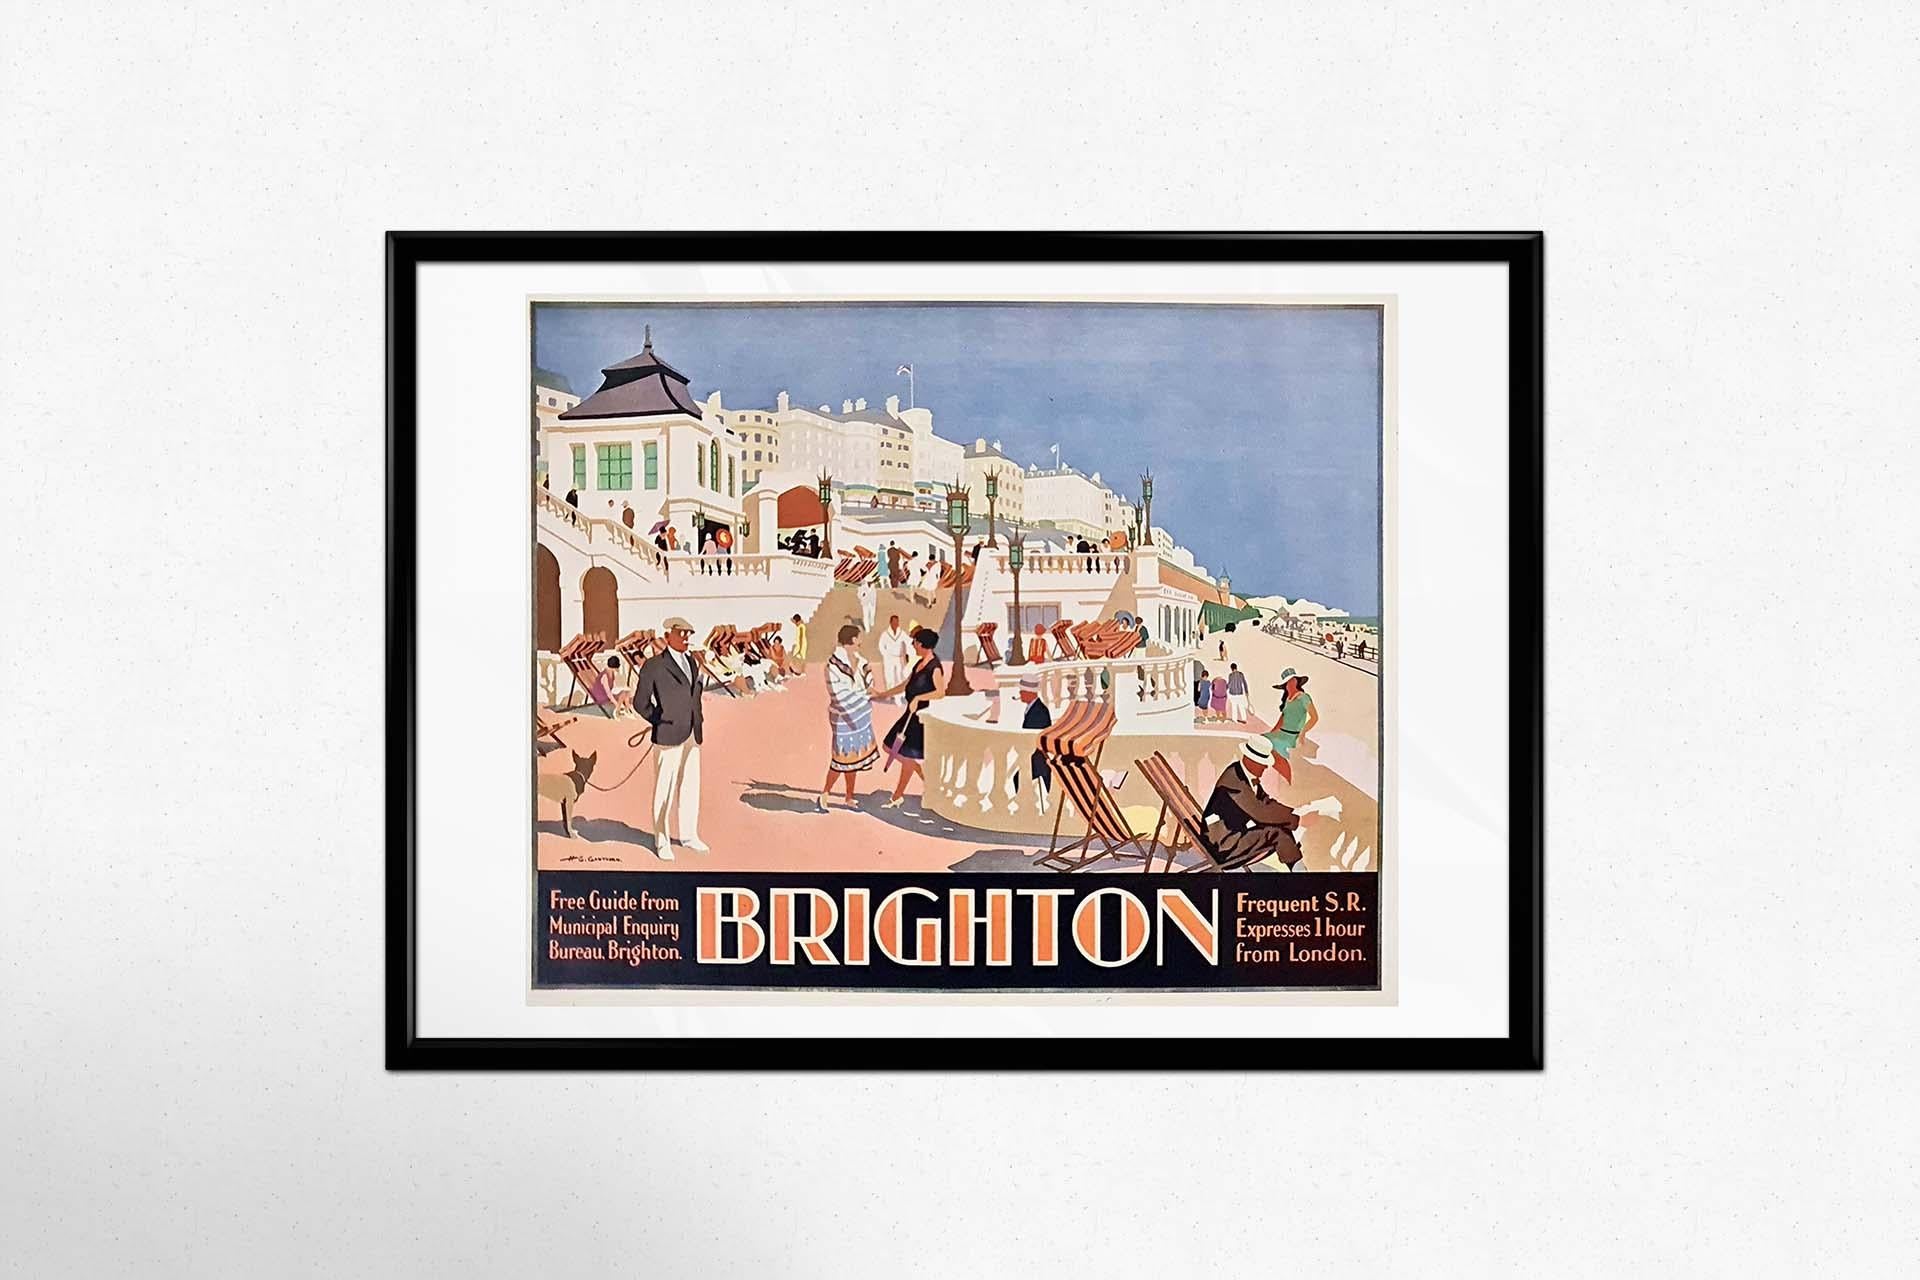 Original poster by Henry George Gawthorn Brighton Frequent S.R. Expresses For Sale 1